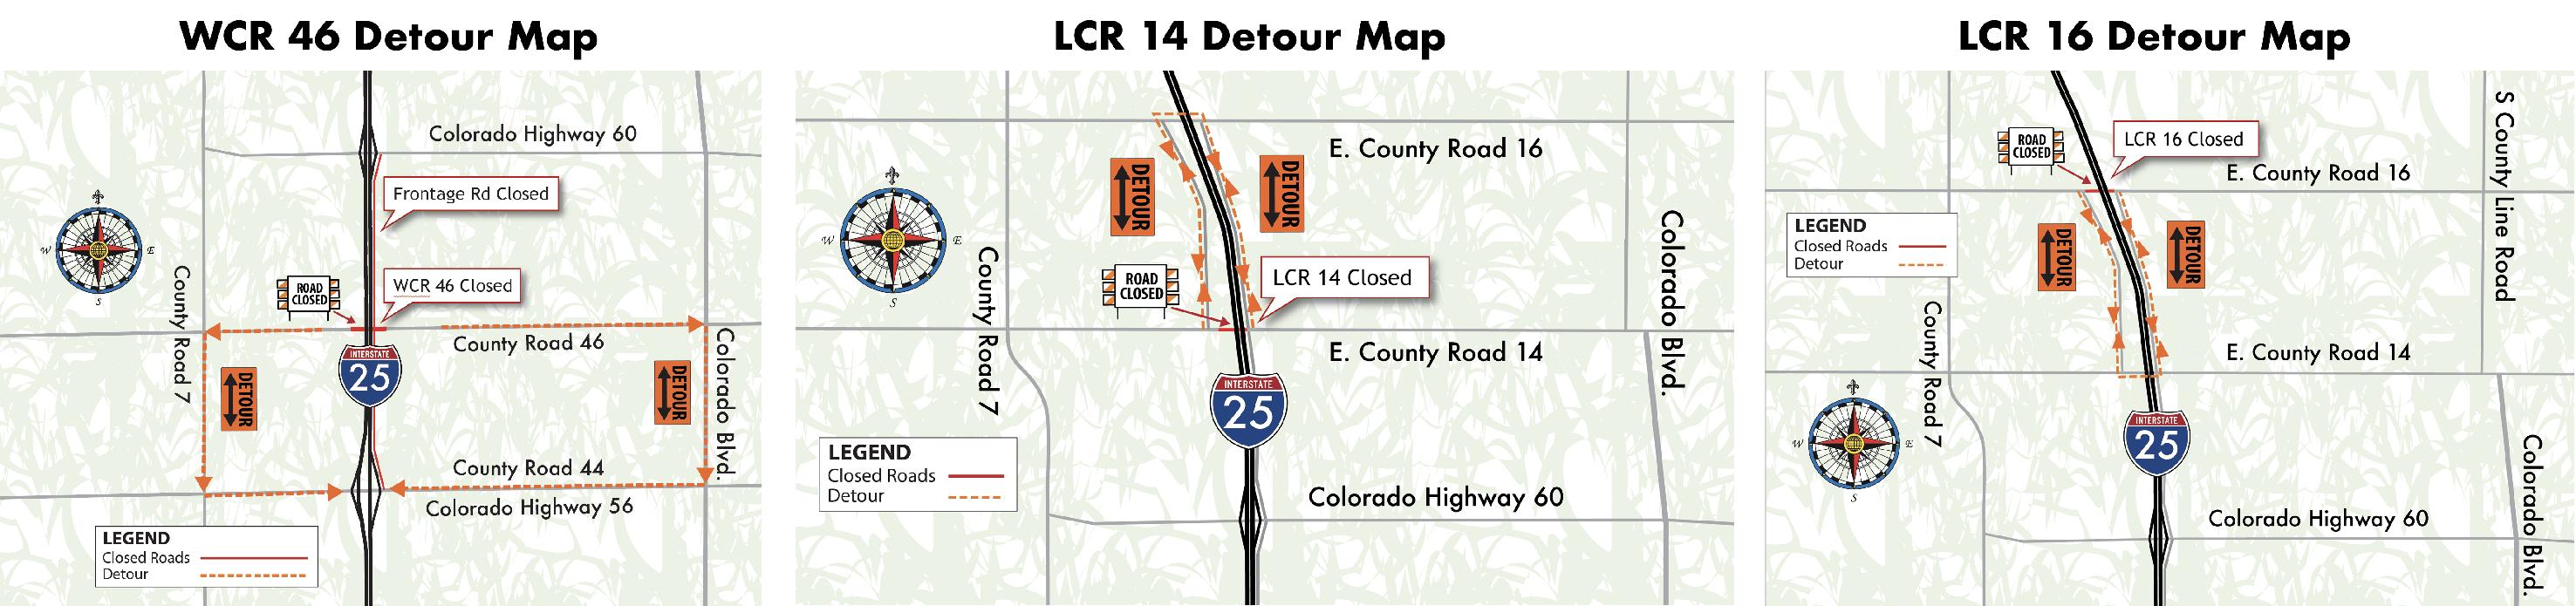 Weld County Road 46, Larimer County Road 14 and Larimer County Road detour maps detail image